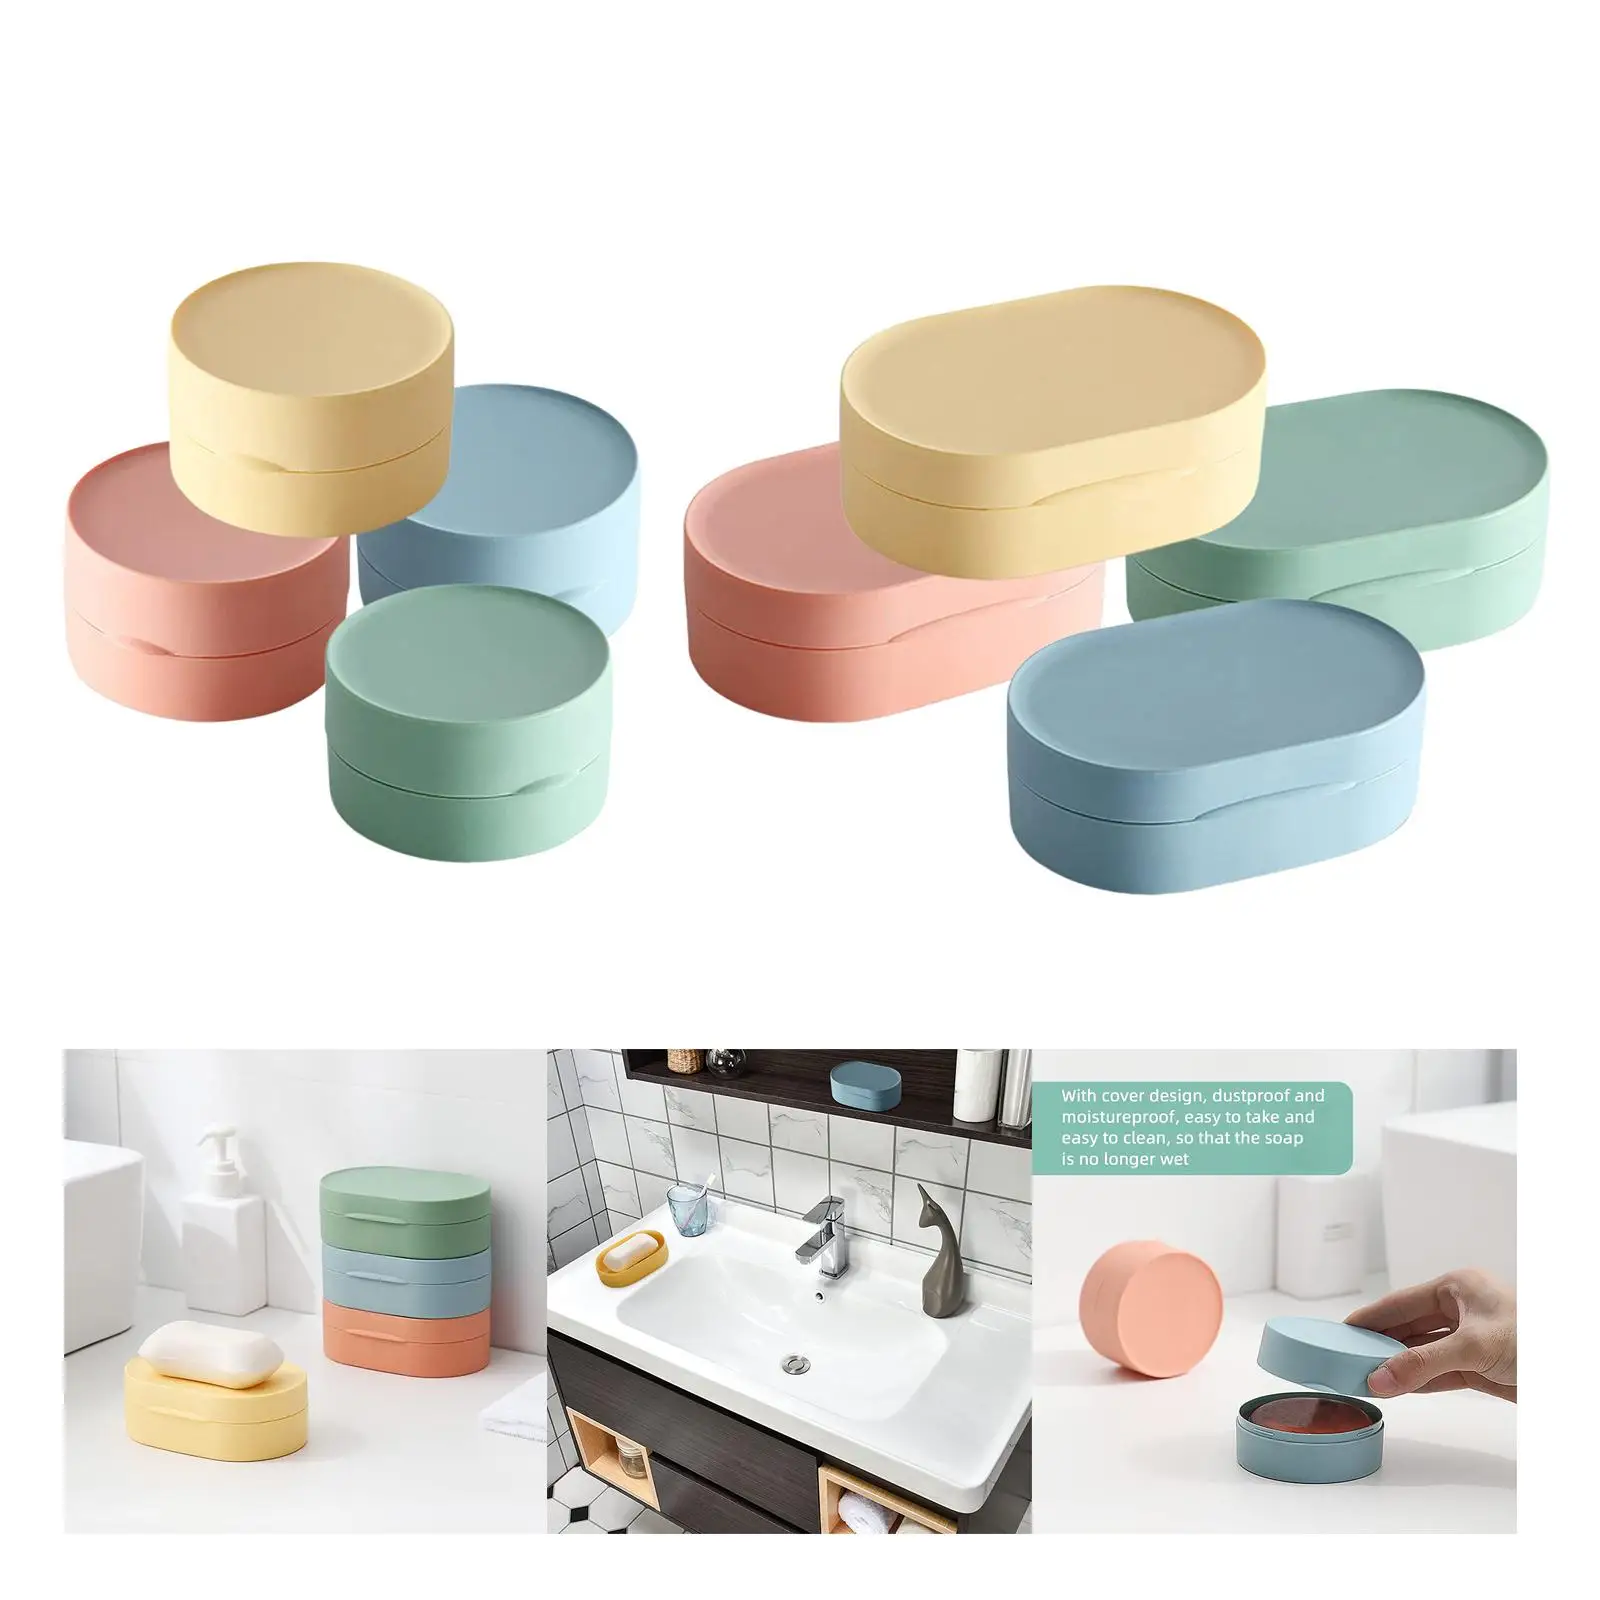 4x Portable Travel Soap Box Soap Container  Case Sealing Organizer Protector Waterproof for Bathroom Outdoor Hotel Hiking